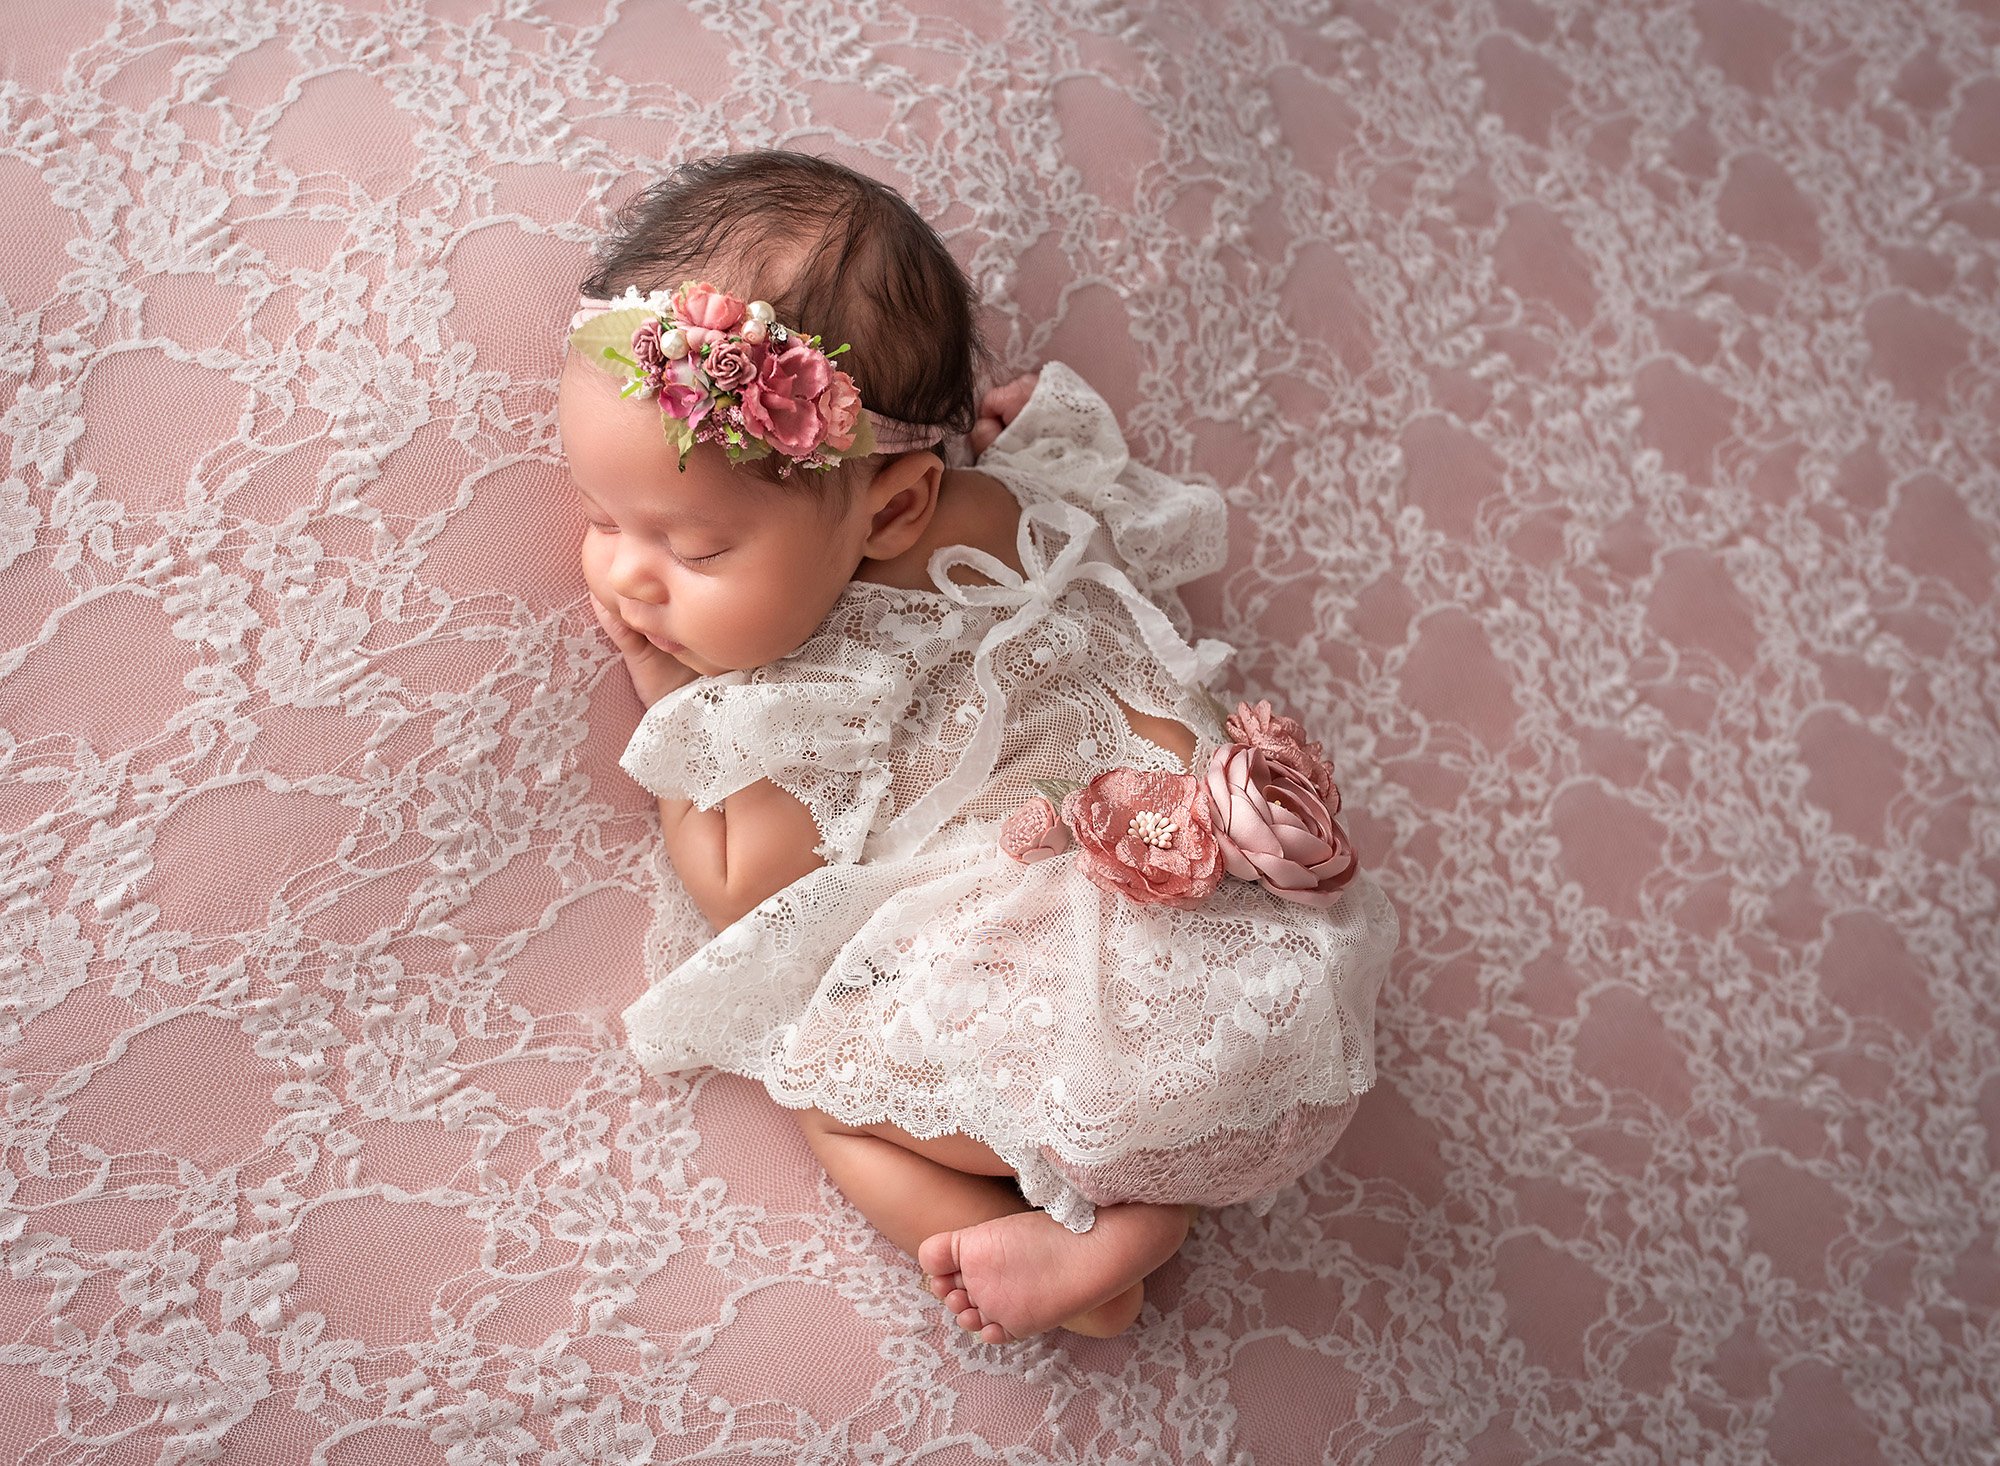 girly girl newborn photos newborn baby girl laying on stomach on top of pink lace wearing lace dress and pink floral headband